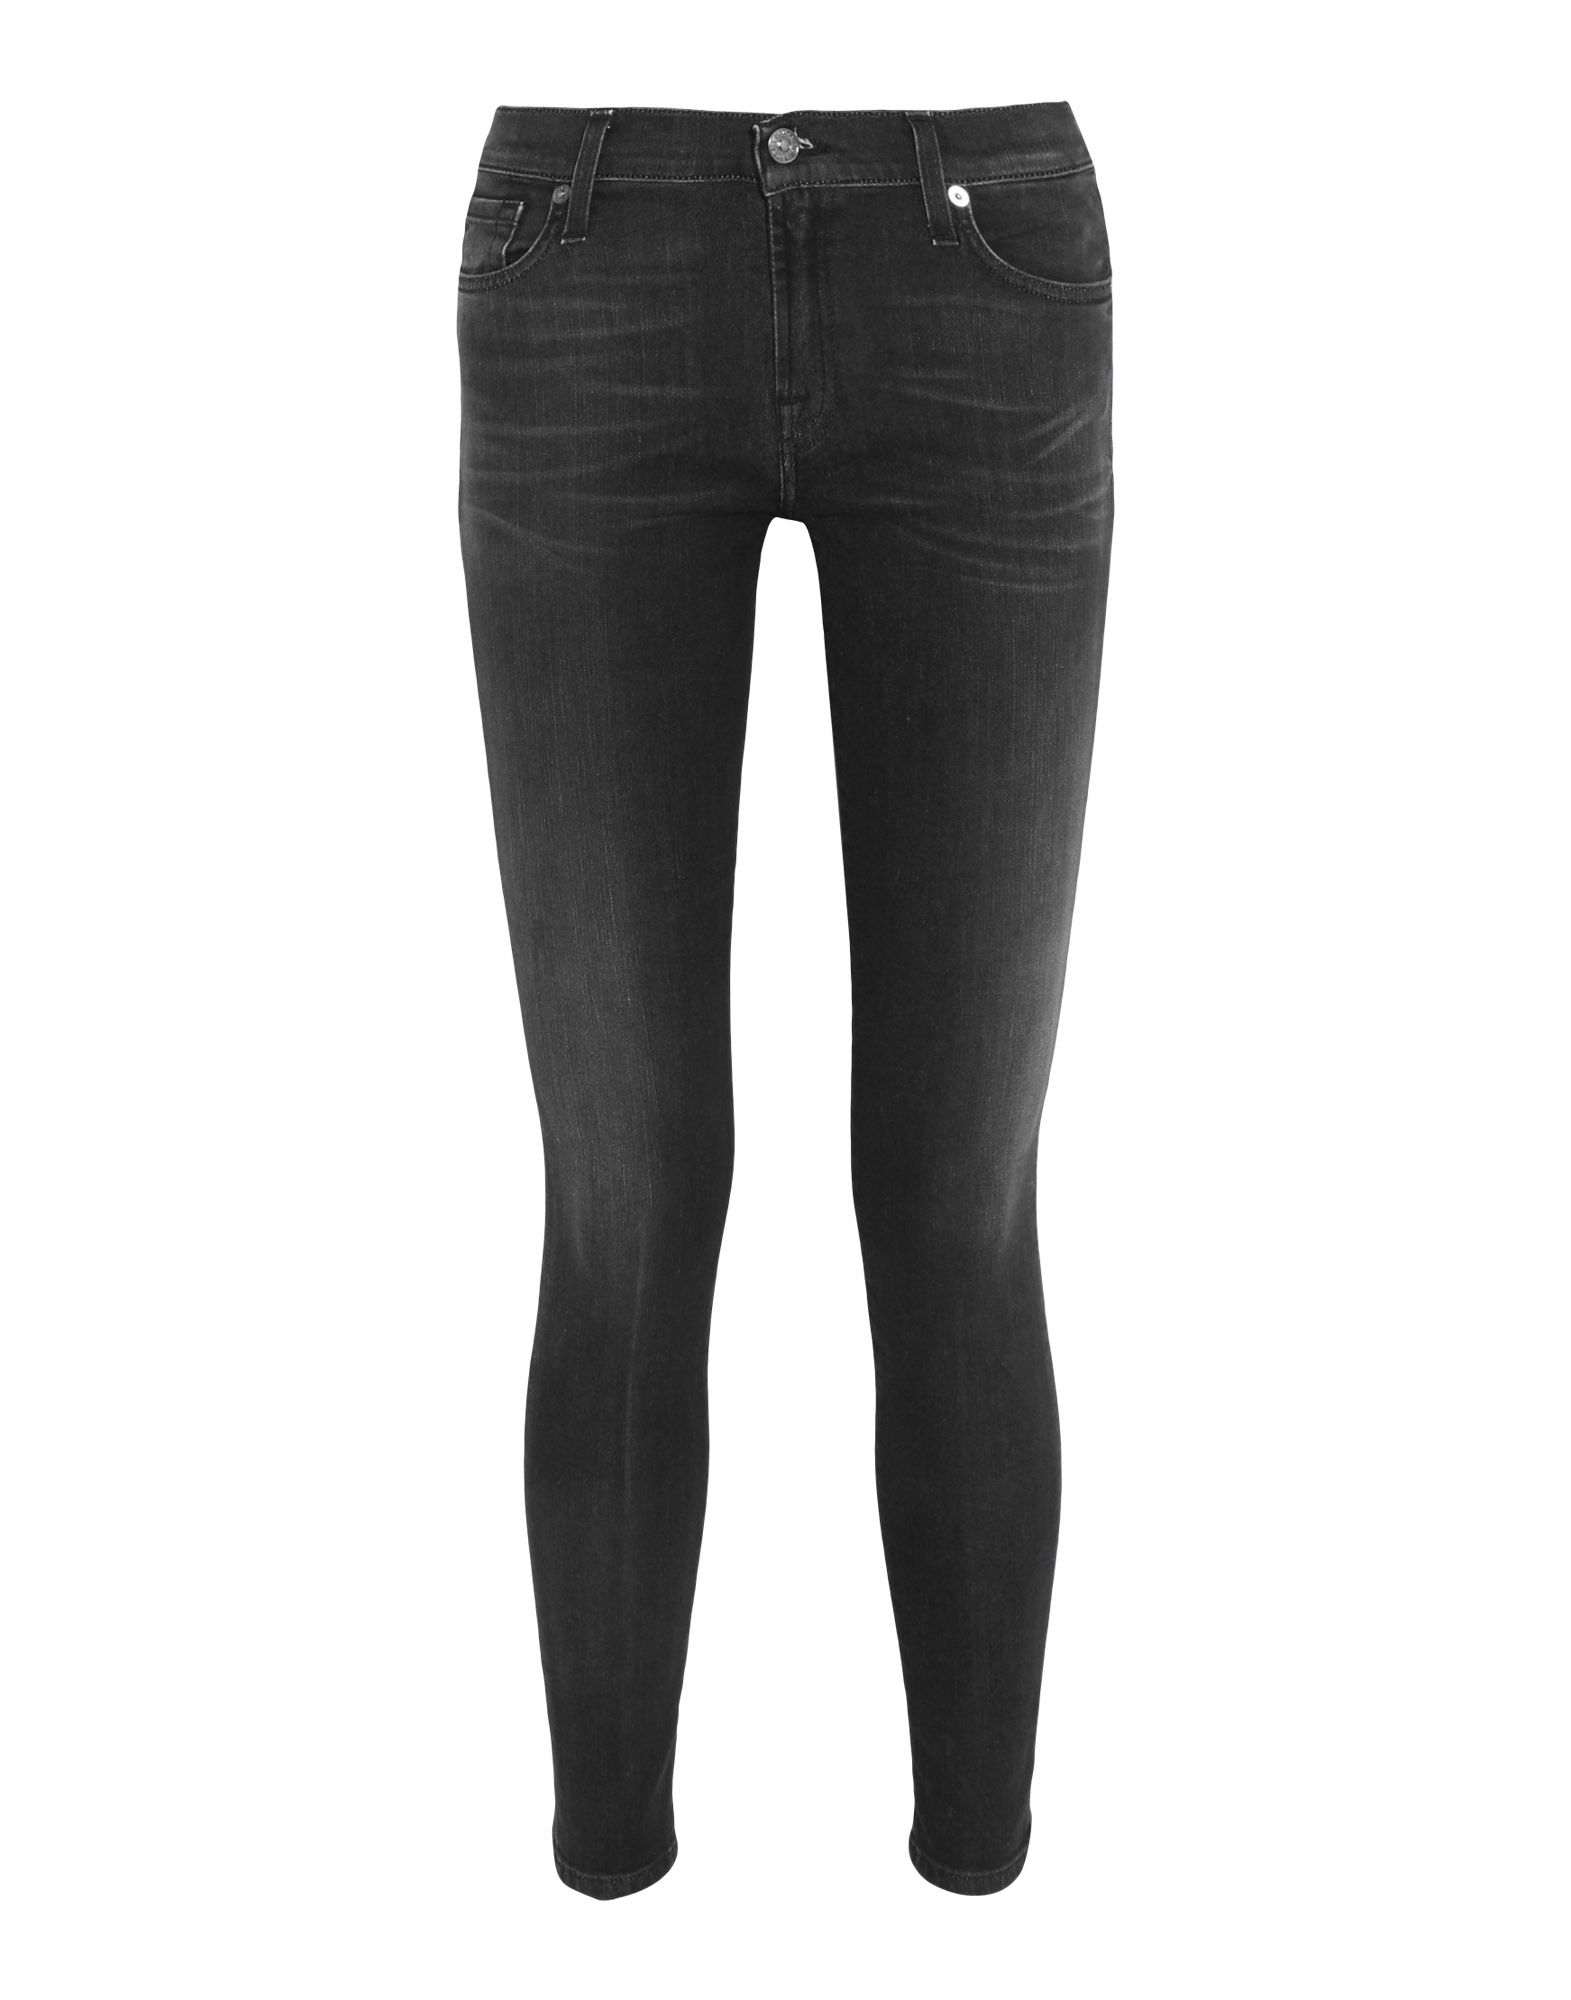 7 FOR ALL MANKIND Denim trousers,42683075EJ 6